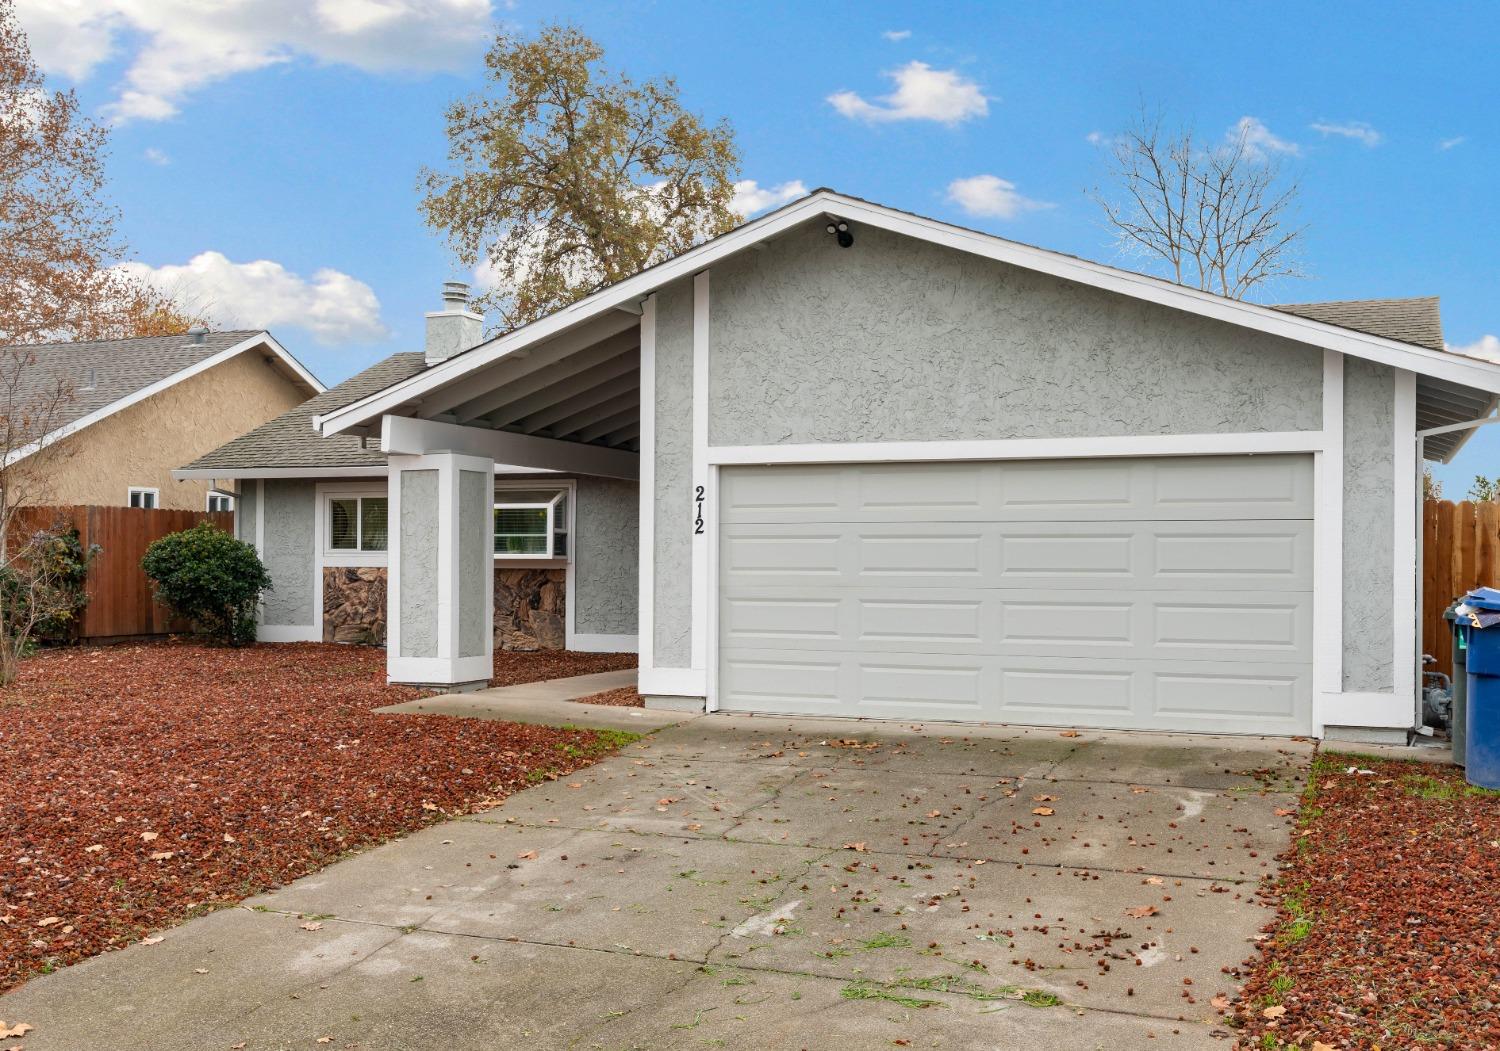 Photo of 212 Withington Ave in Rio Linda, CA